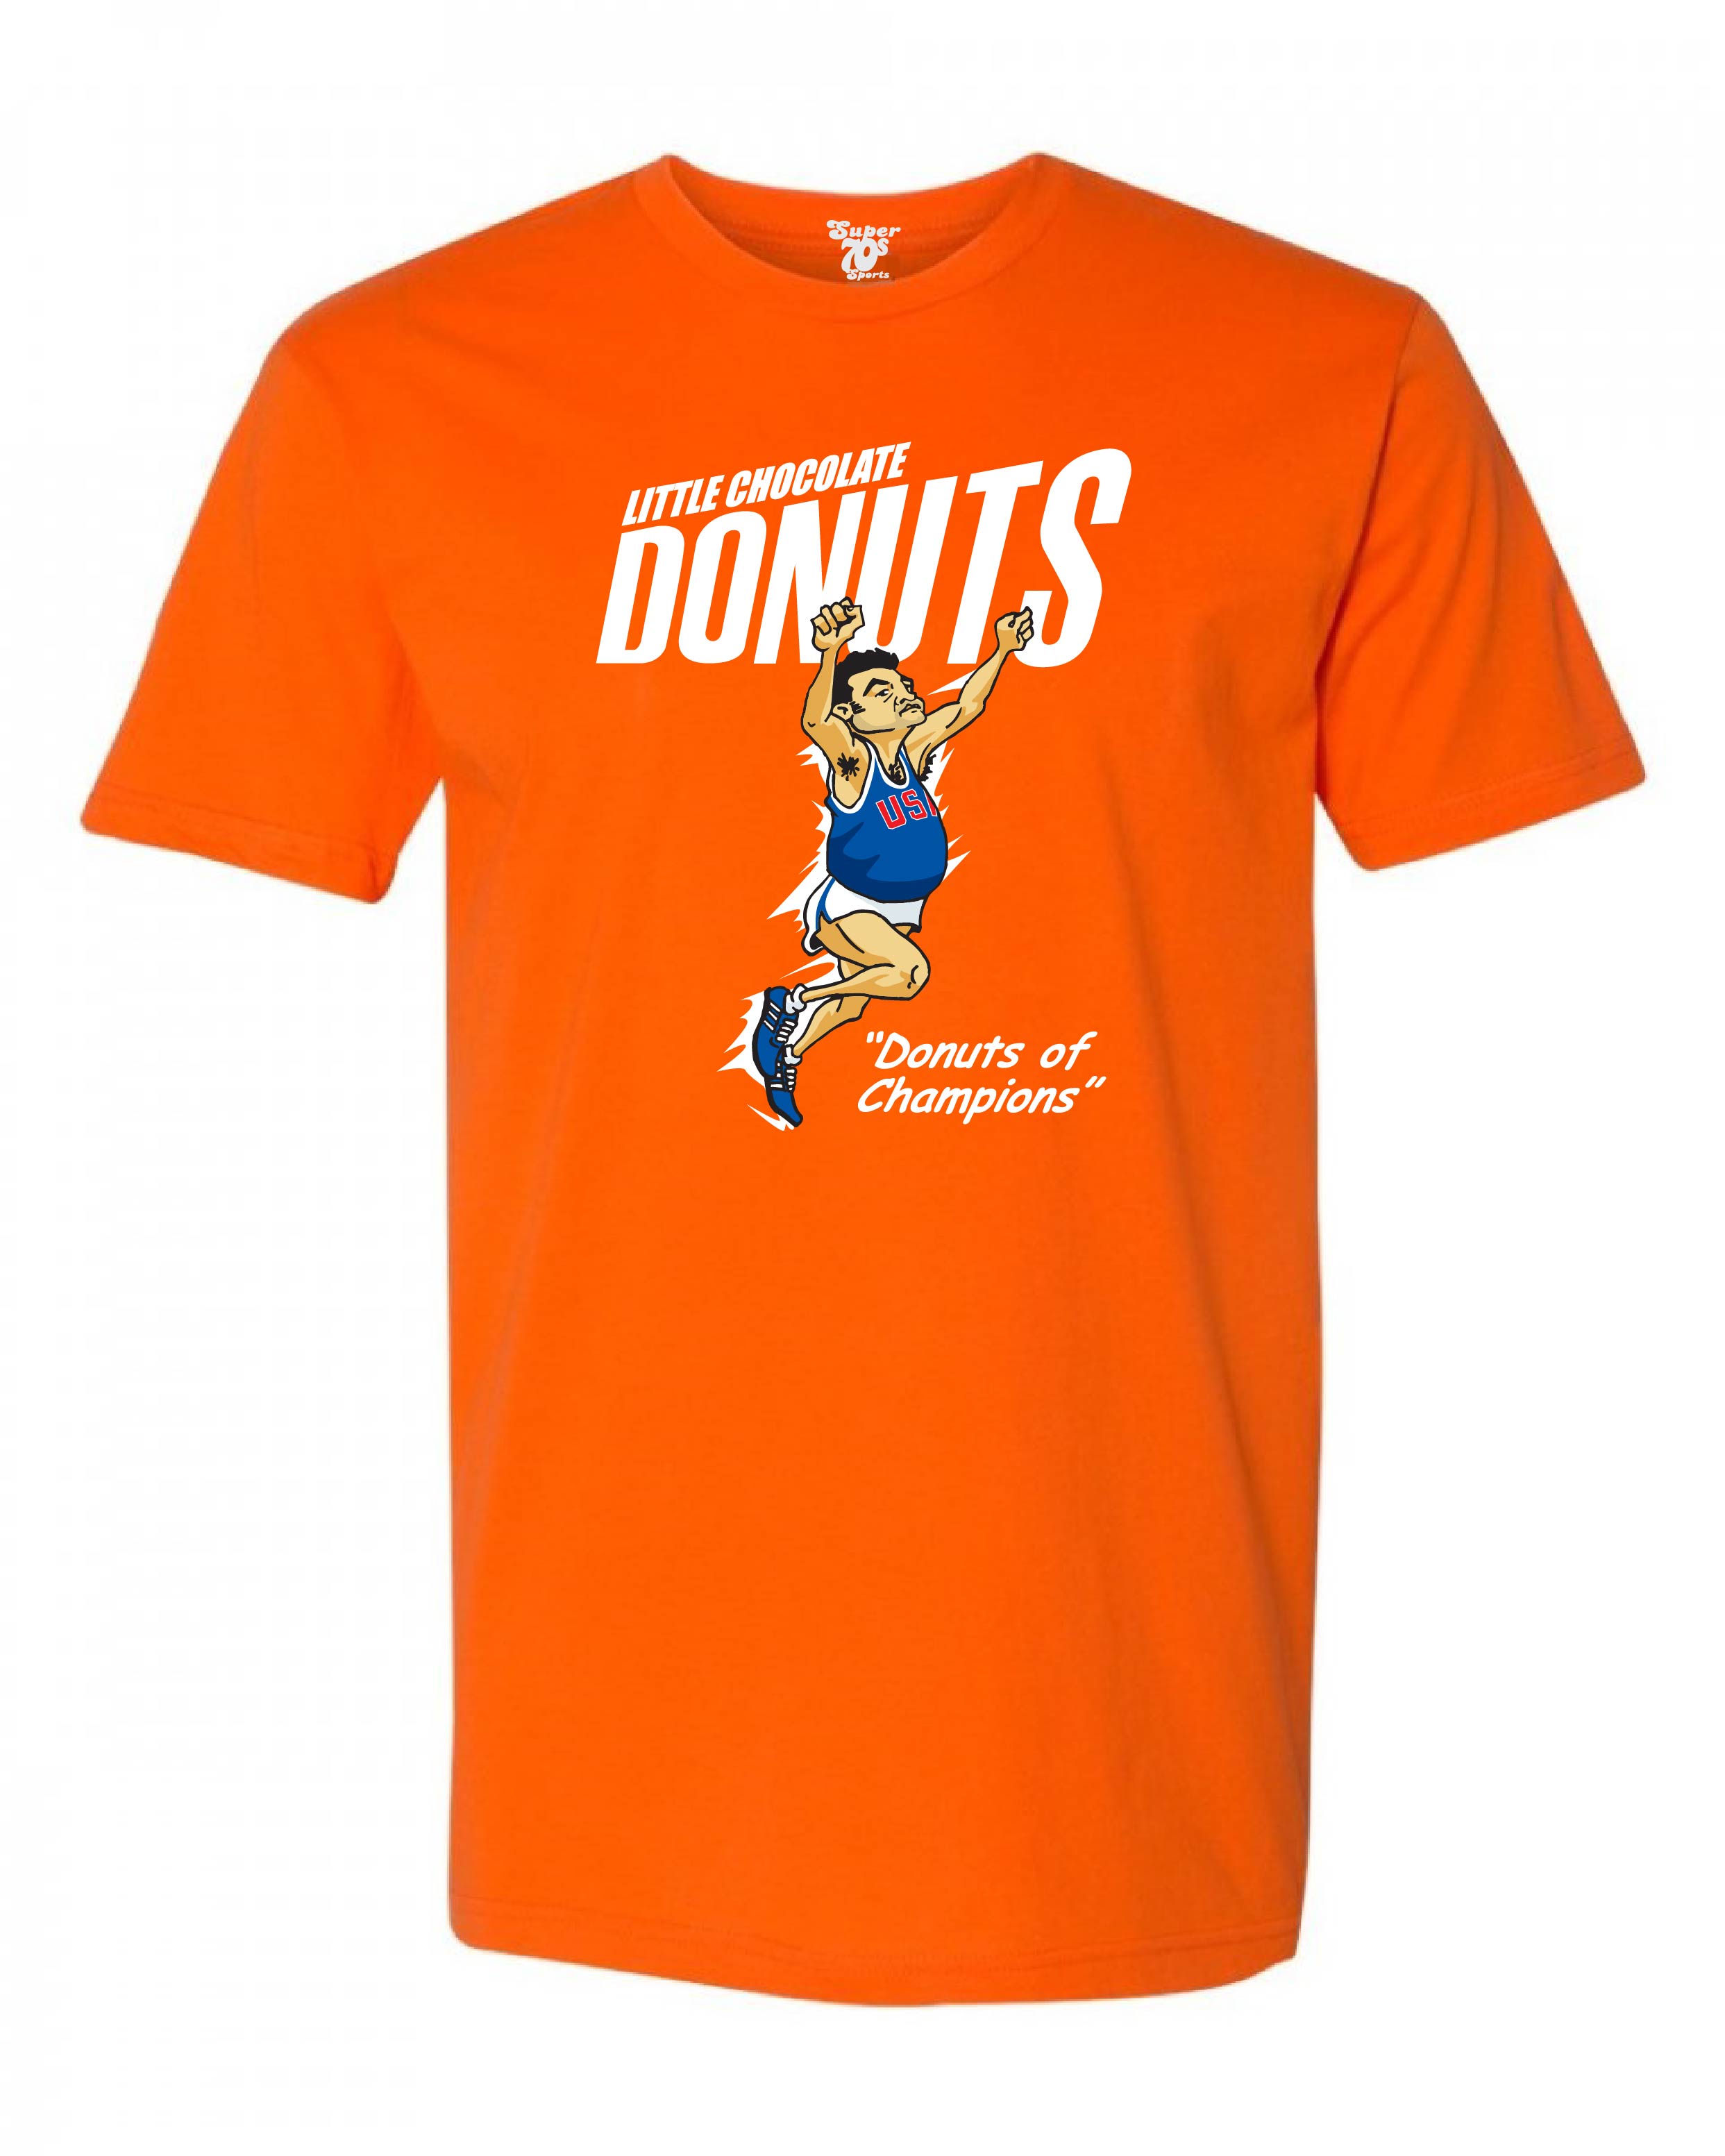 Little Chocolate Donuts Tee – Super 70s Sports